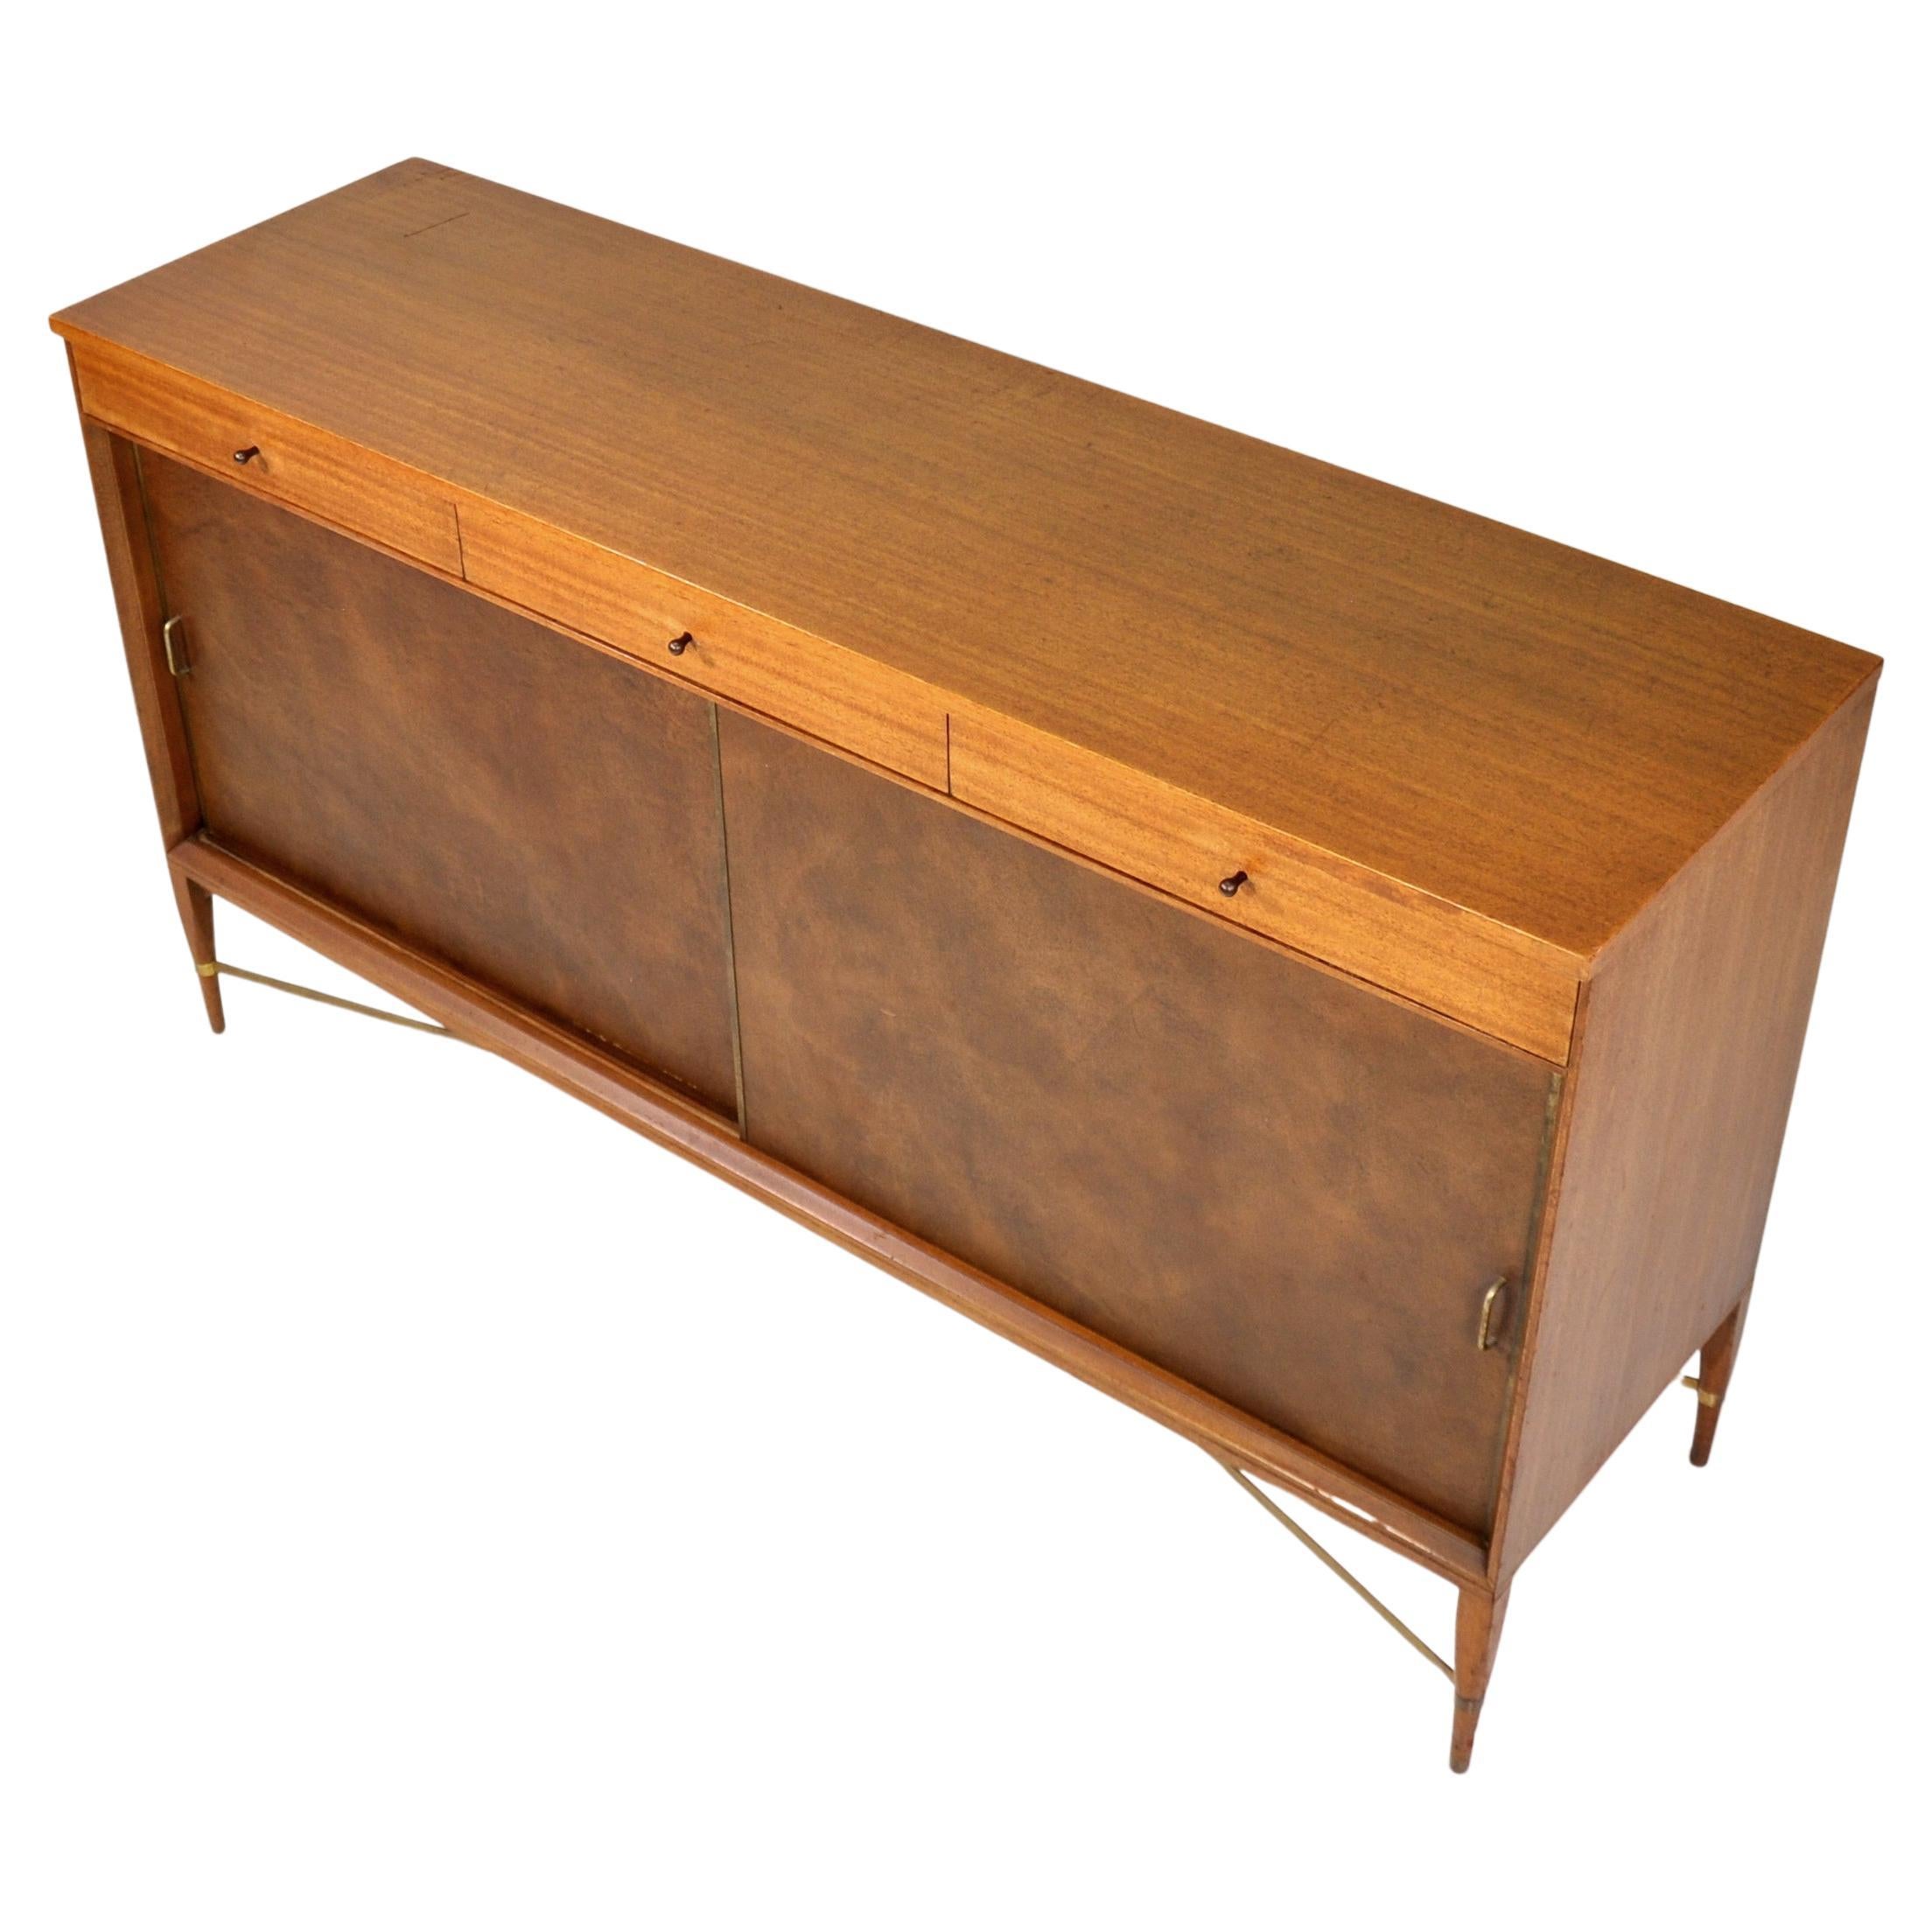 Mahogany Paul McCobb Irwin Collection Brass and Leather Credenza by Calvin For Sale